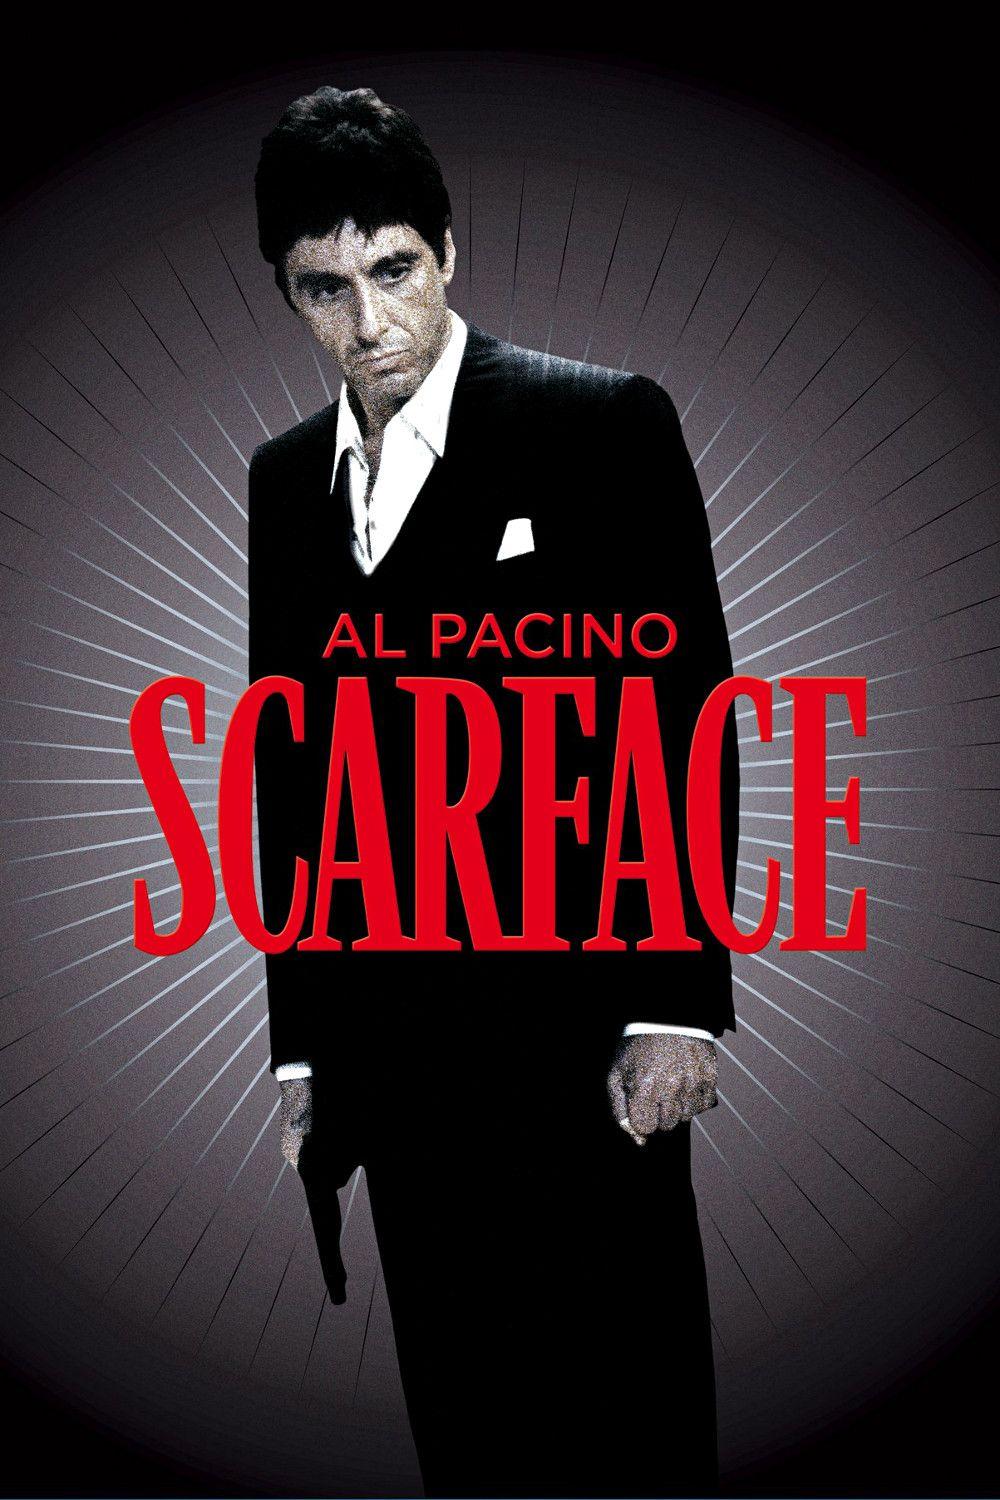 Scarface Quotes Wallpapers - Top Free Scarface Quotes Backgrounds